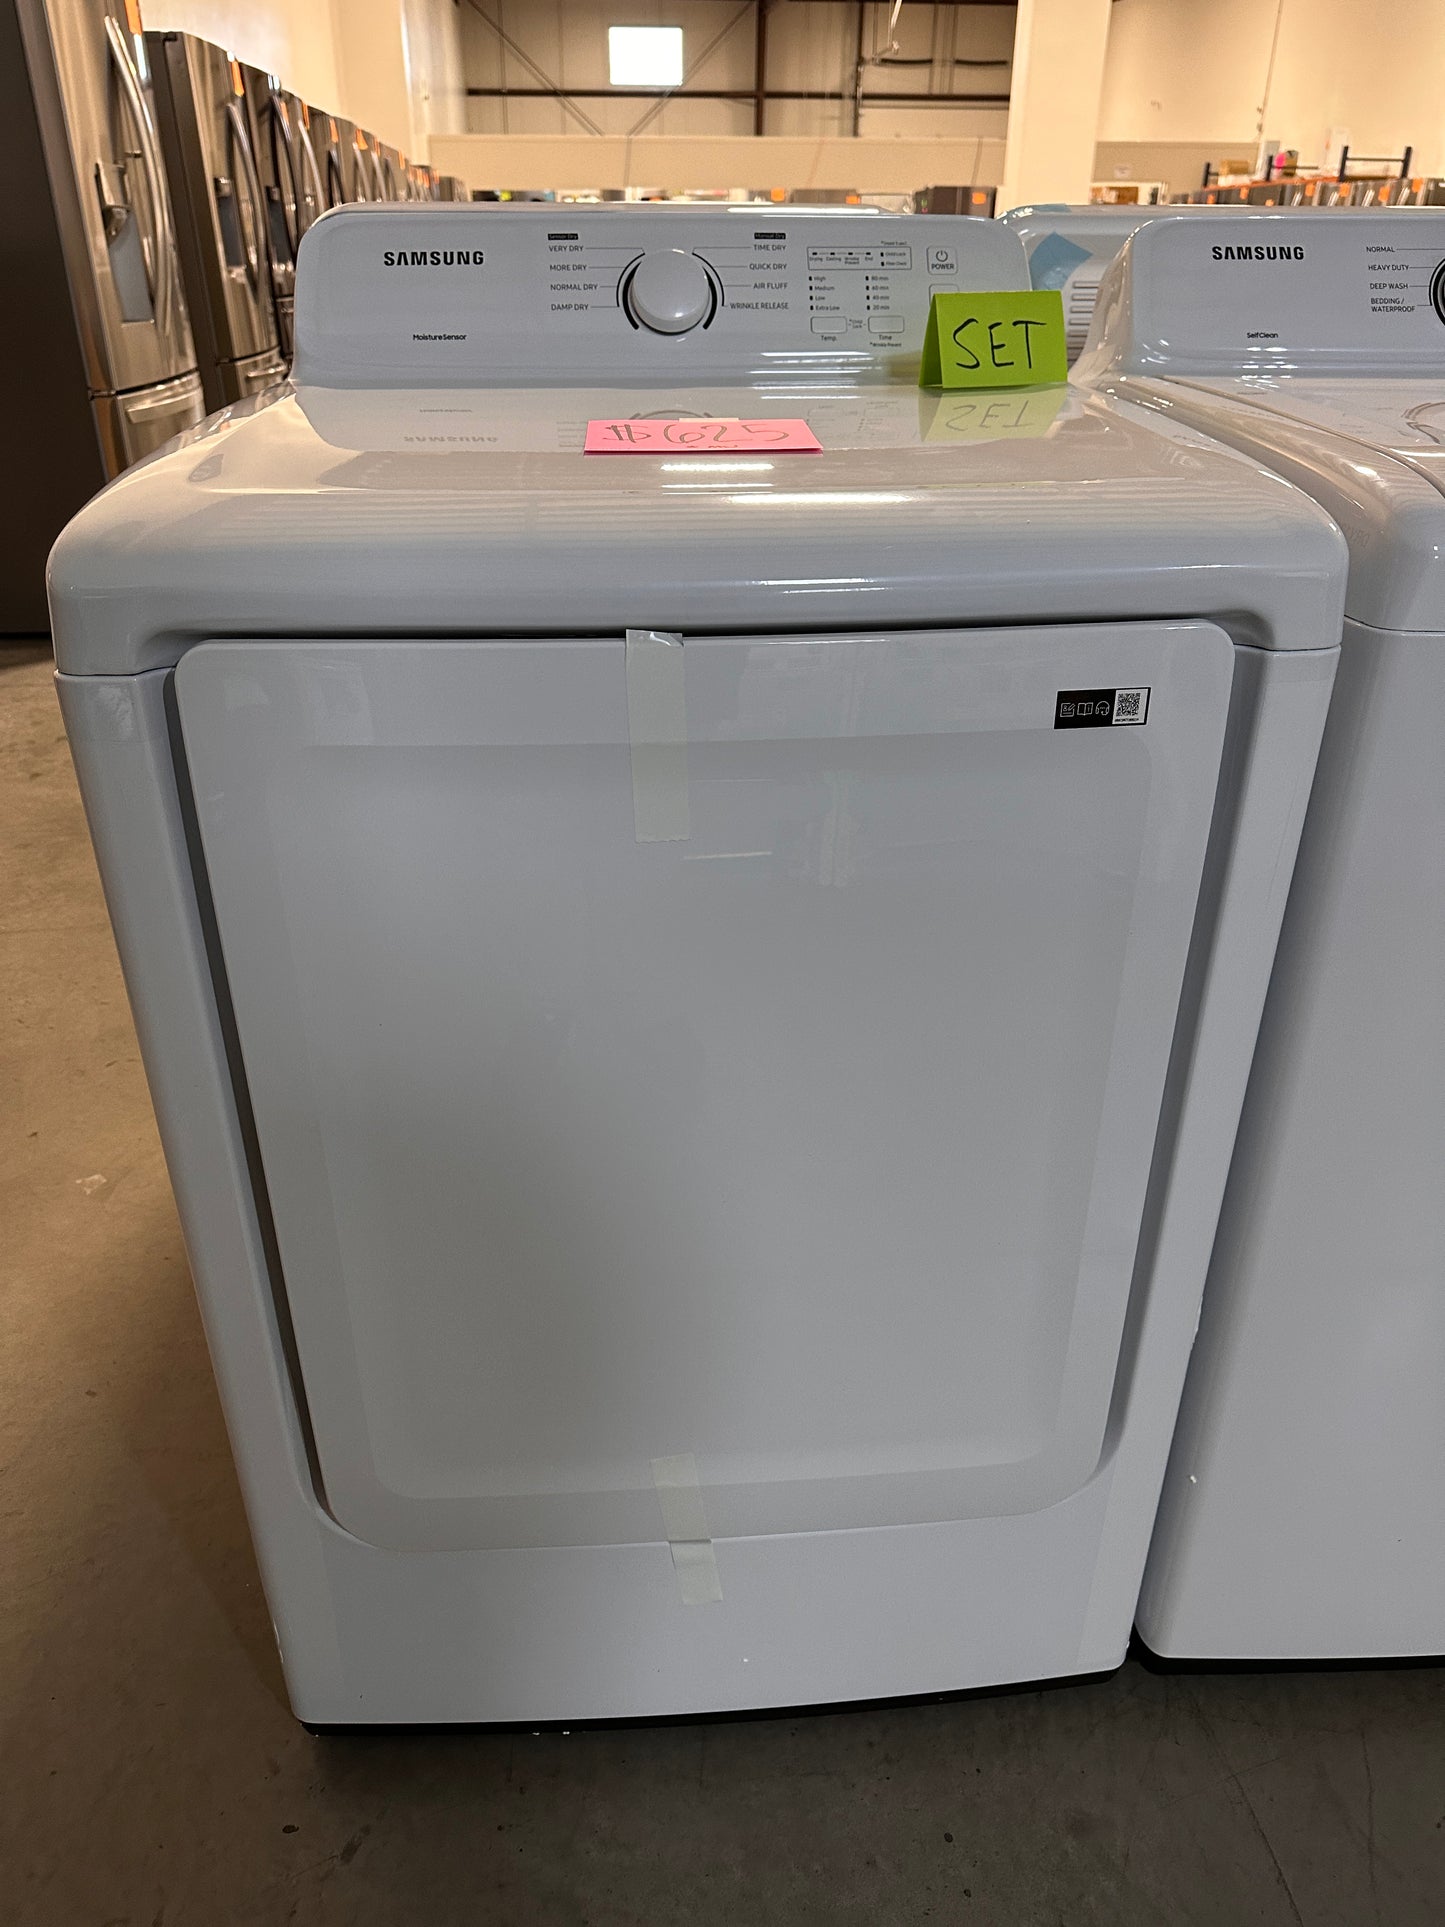 GORGEOUS NEW ELECTRIC DRYER WITH SENSOR DRYER - DRY12167